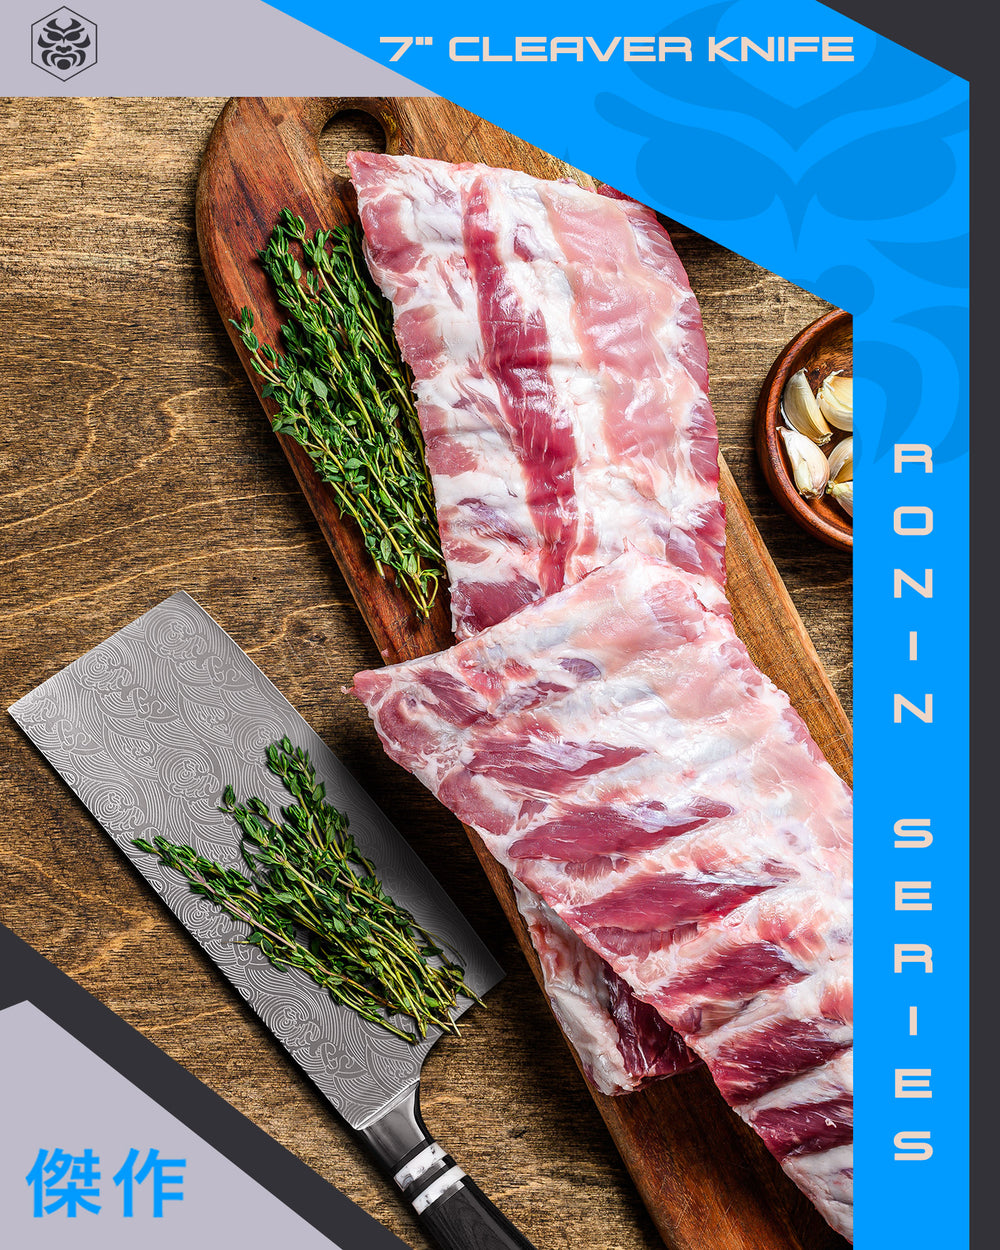 The Ronin Cleaver Knife with large racks of ribs, rosemary, garlic, peppercorns,, and pink salt